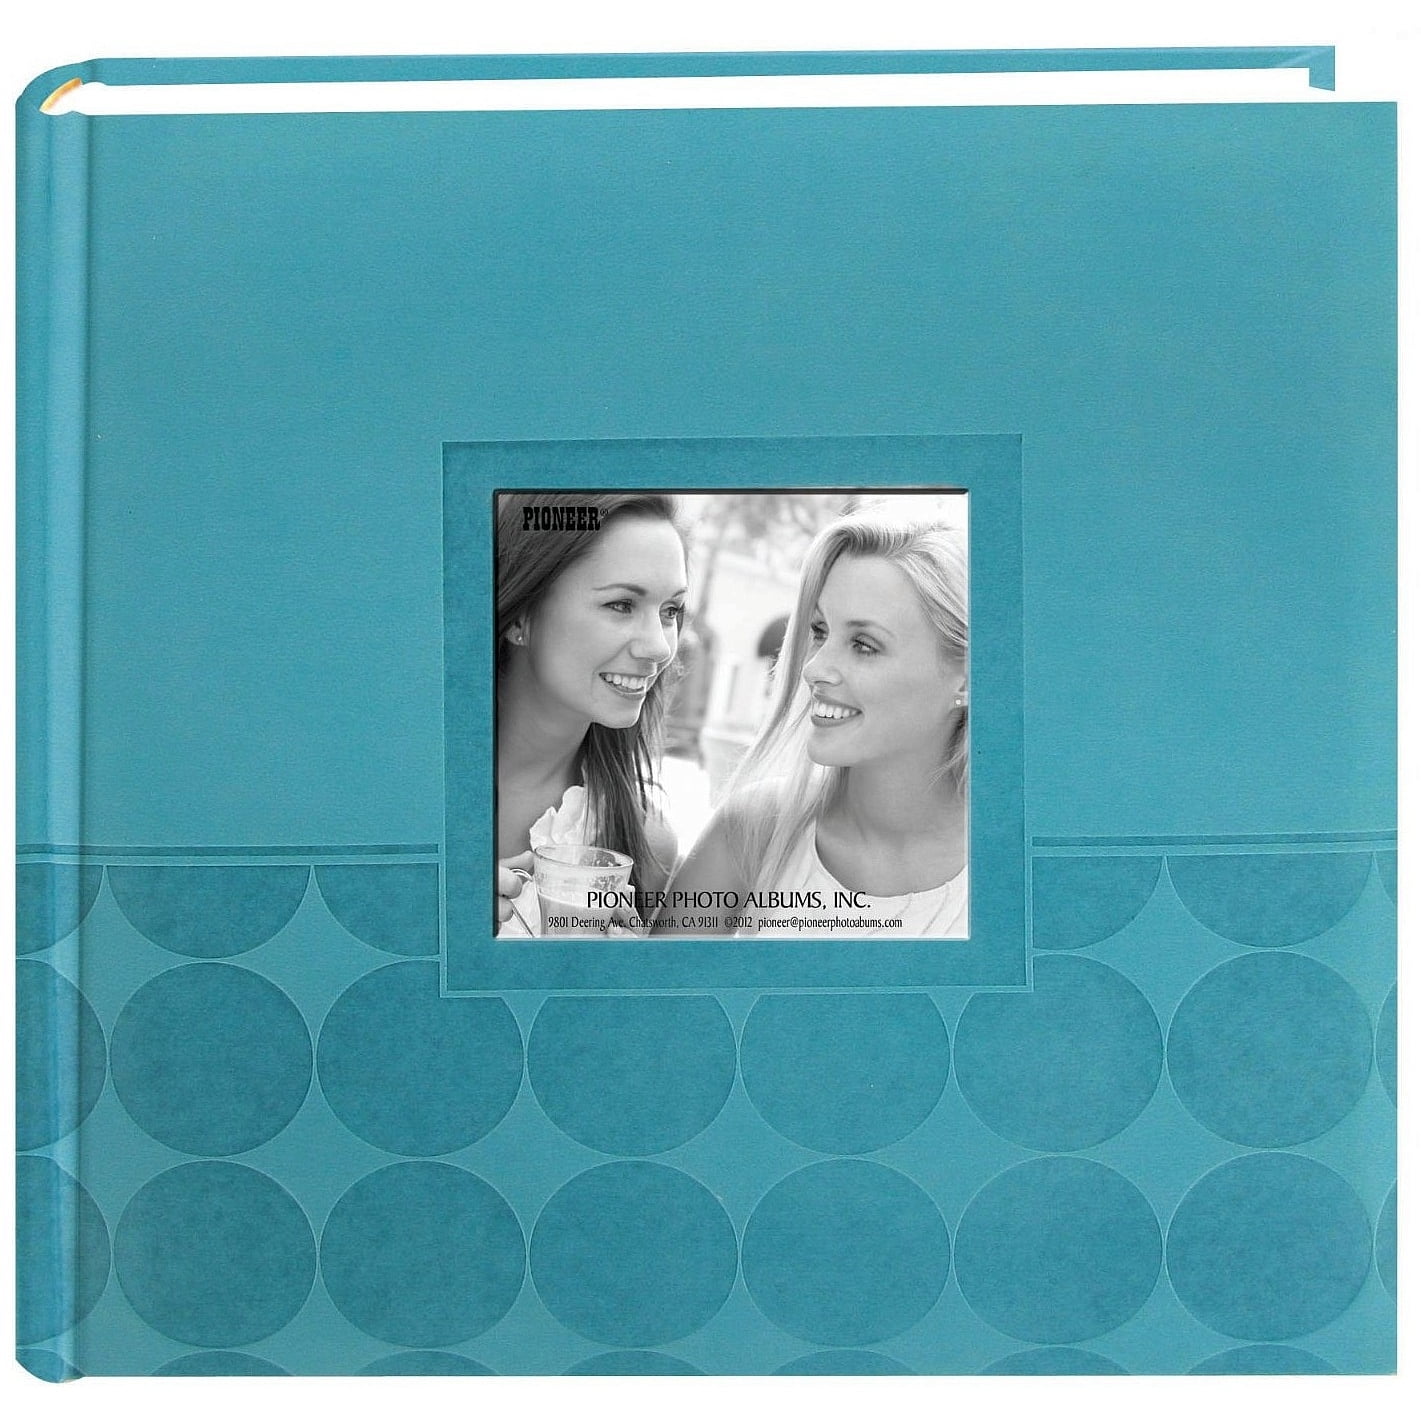 PIONEER PHOTO ALBUMS - Arts & Crafts - 9801 Deering Ave, Chatsworth,  California - Phone Number - Yelp